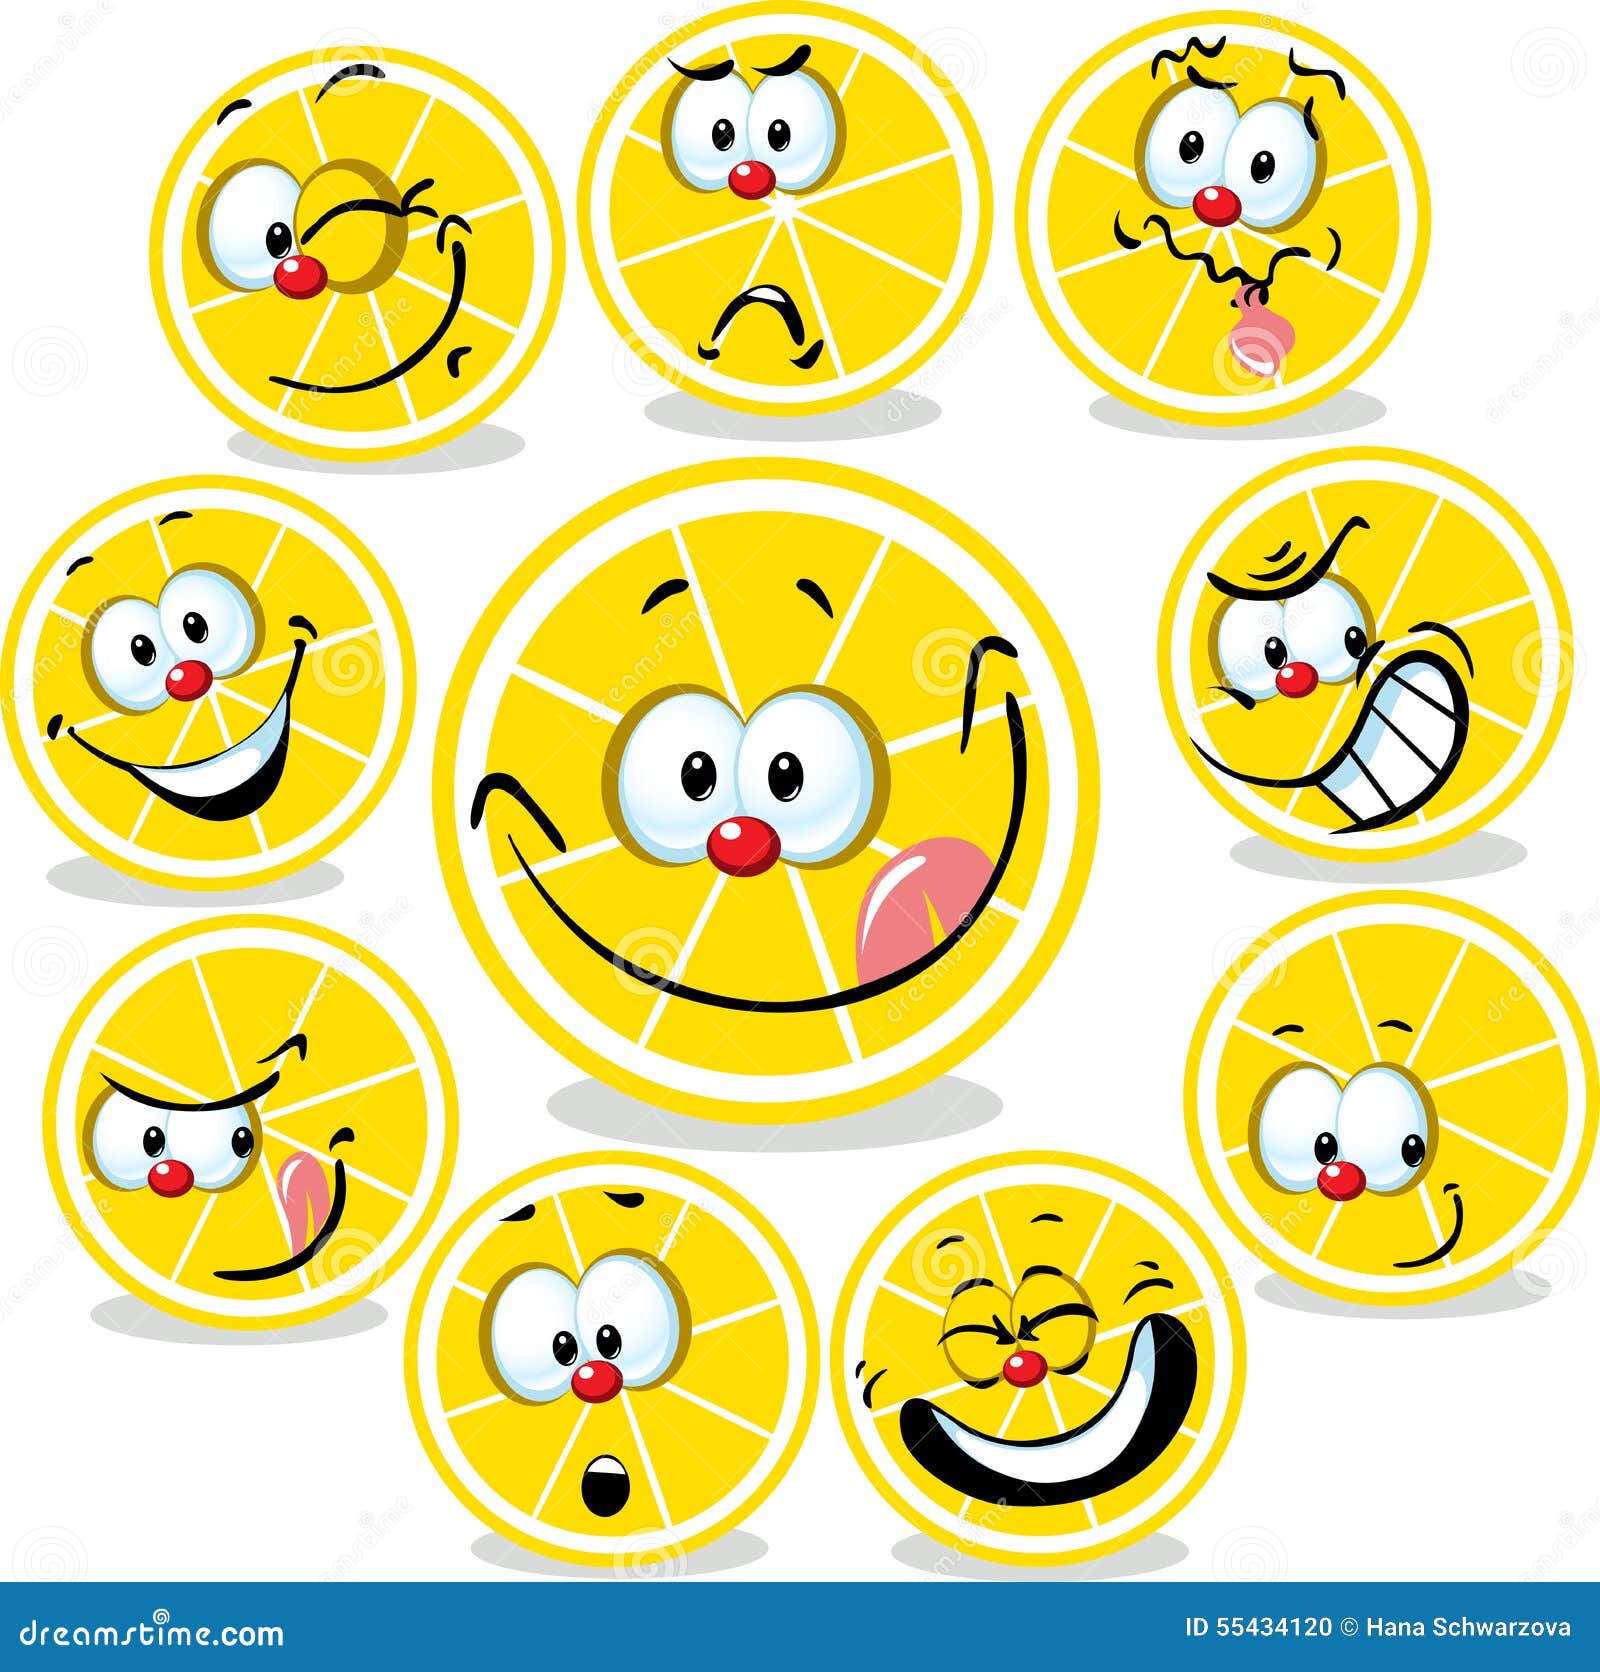 Lemon Icon Cartoon With Funny Faces Stock Vector - Image: 55434120